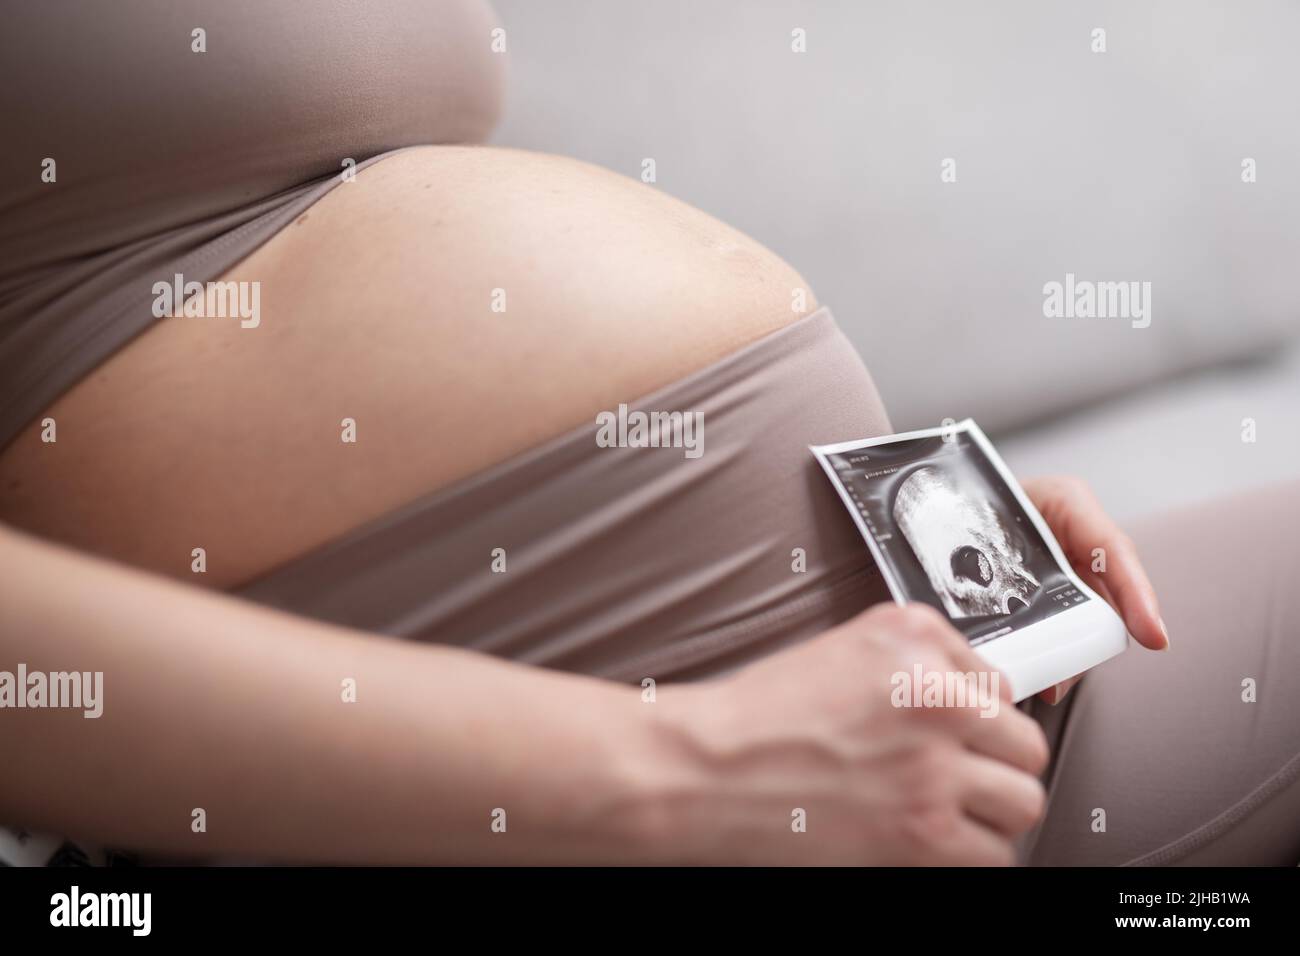 Pregnant woman belly. Pregnancy Concept. Pregnant tummy close up. Detail of pregnant woman relaxing on comfortable sofa at home. Stock Photo